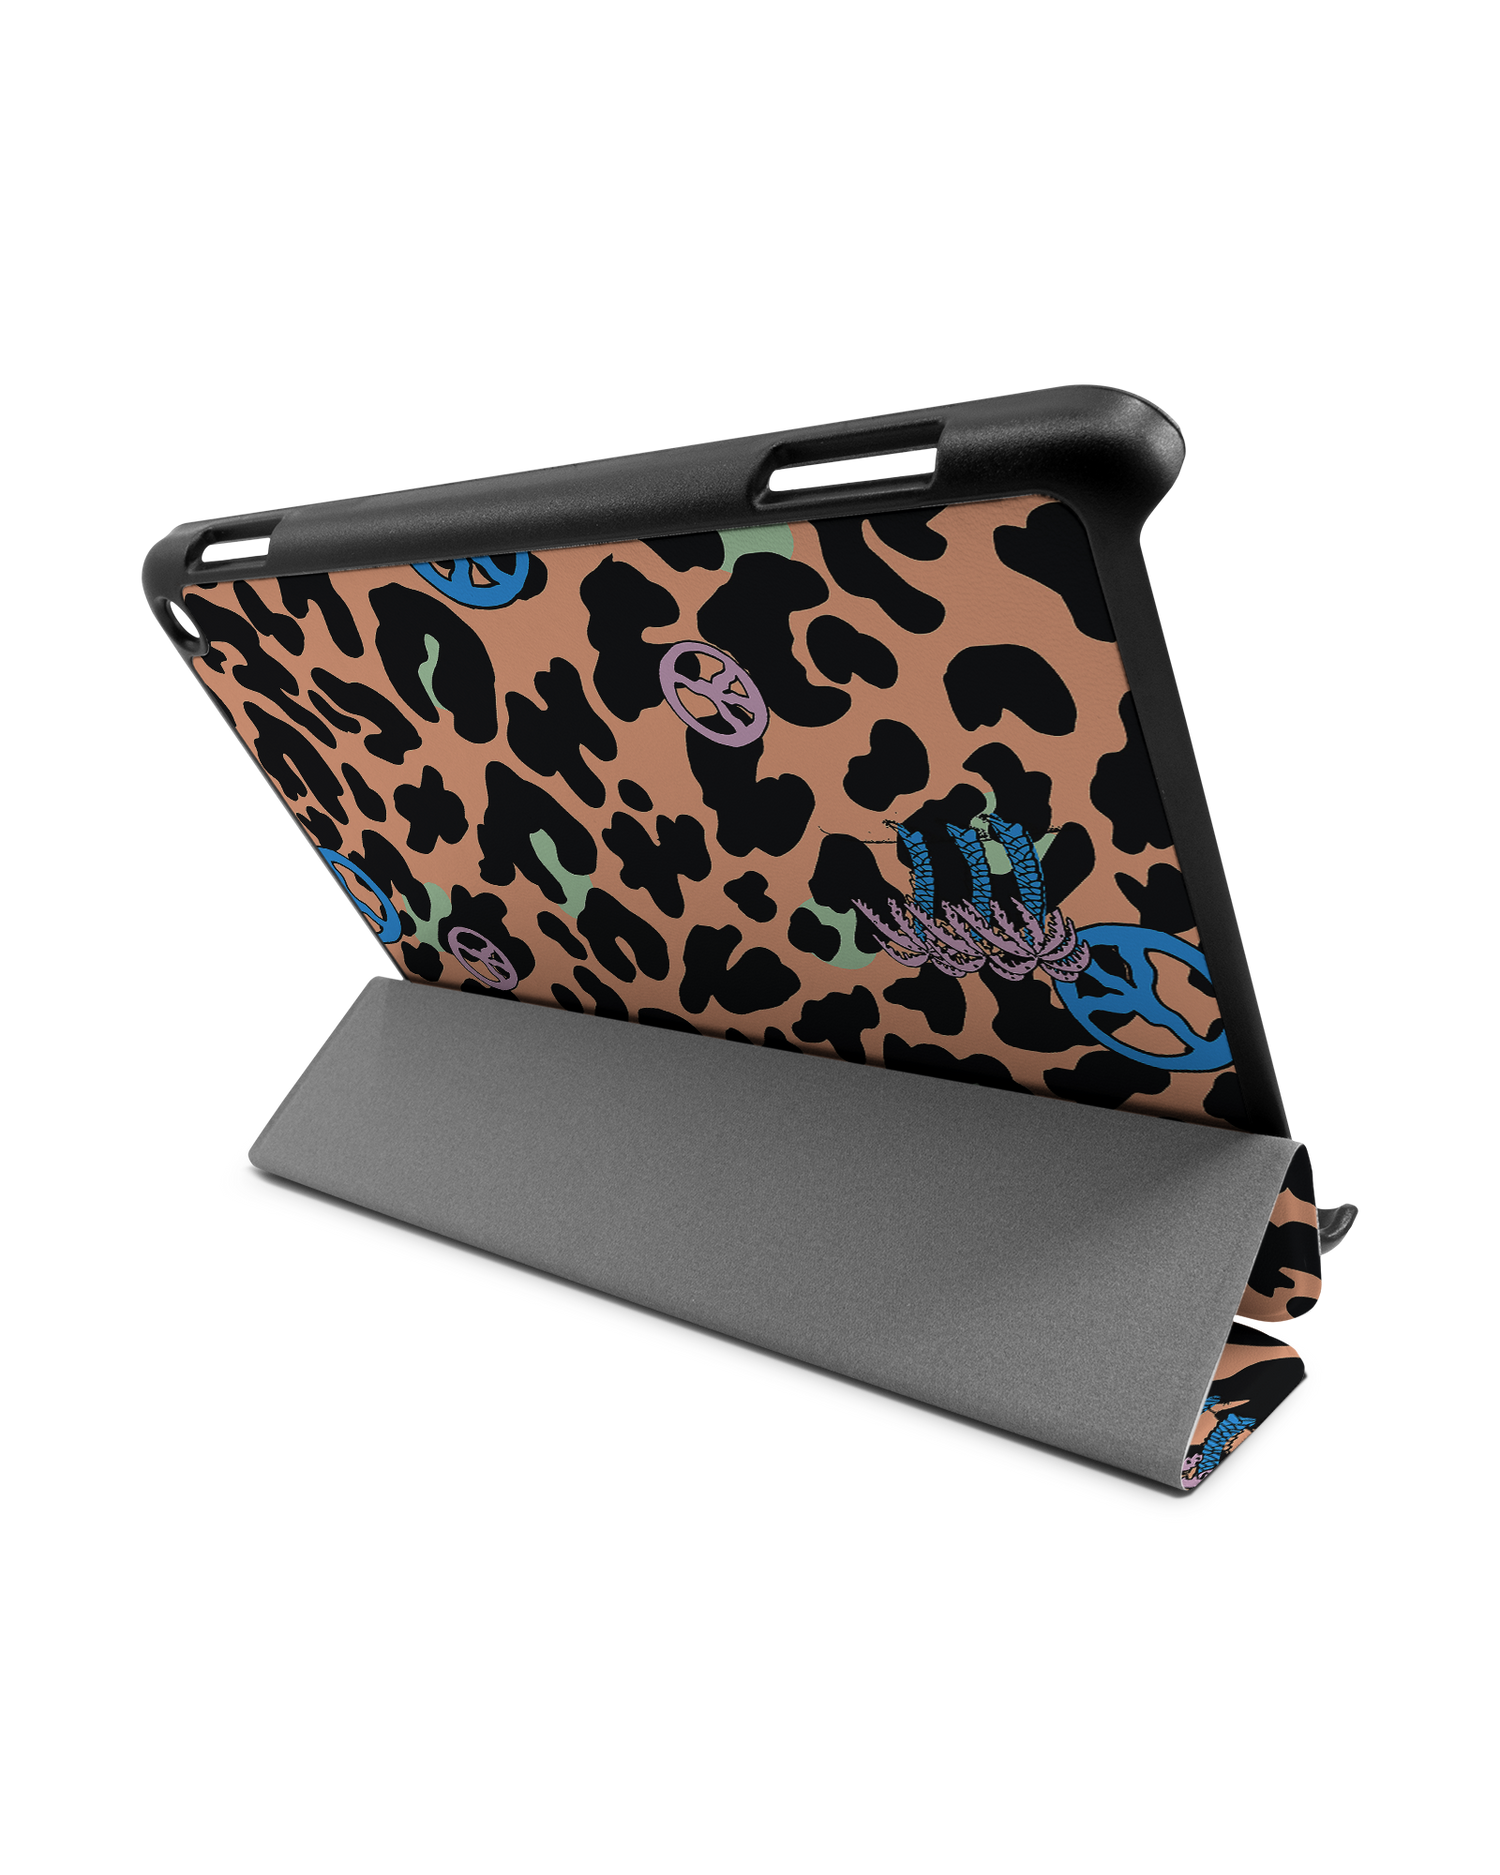 Leopard Peace Palms Tablet Smart Case for Amazon Fire HD 8 (2022), Amazon Fire HD 8 Plus (2022), Amazon Fire HD 8 (2020), Amazon Fire HD 8 Plus (2020): Used as Stand